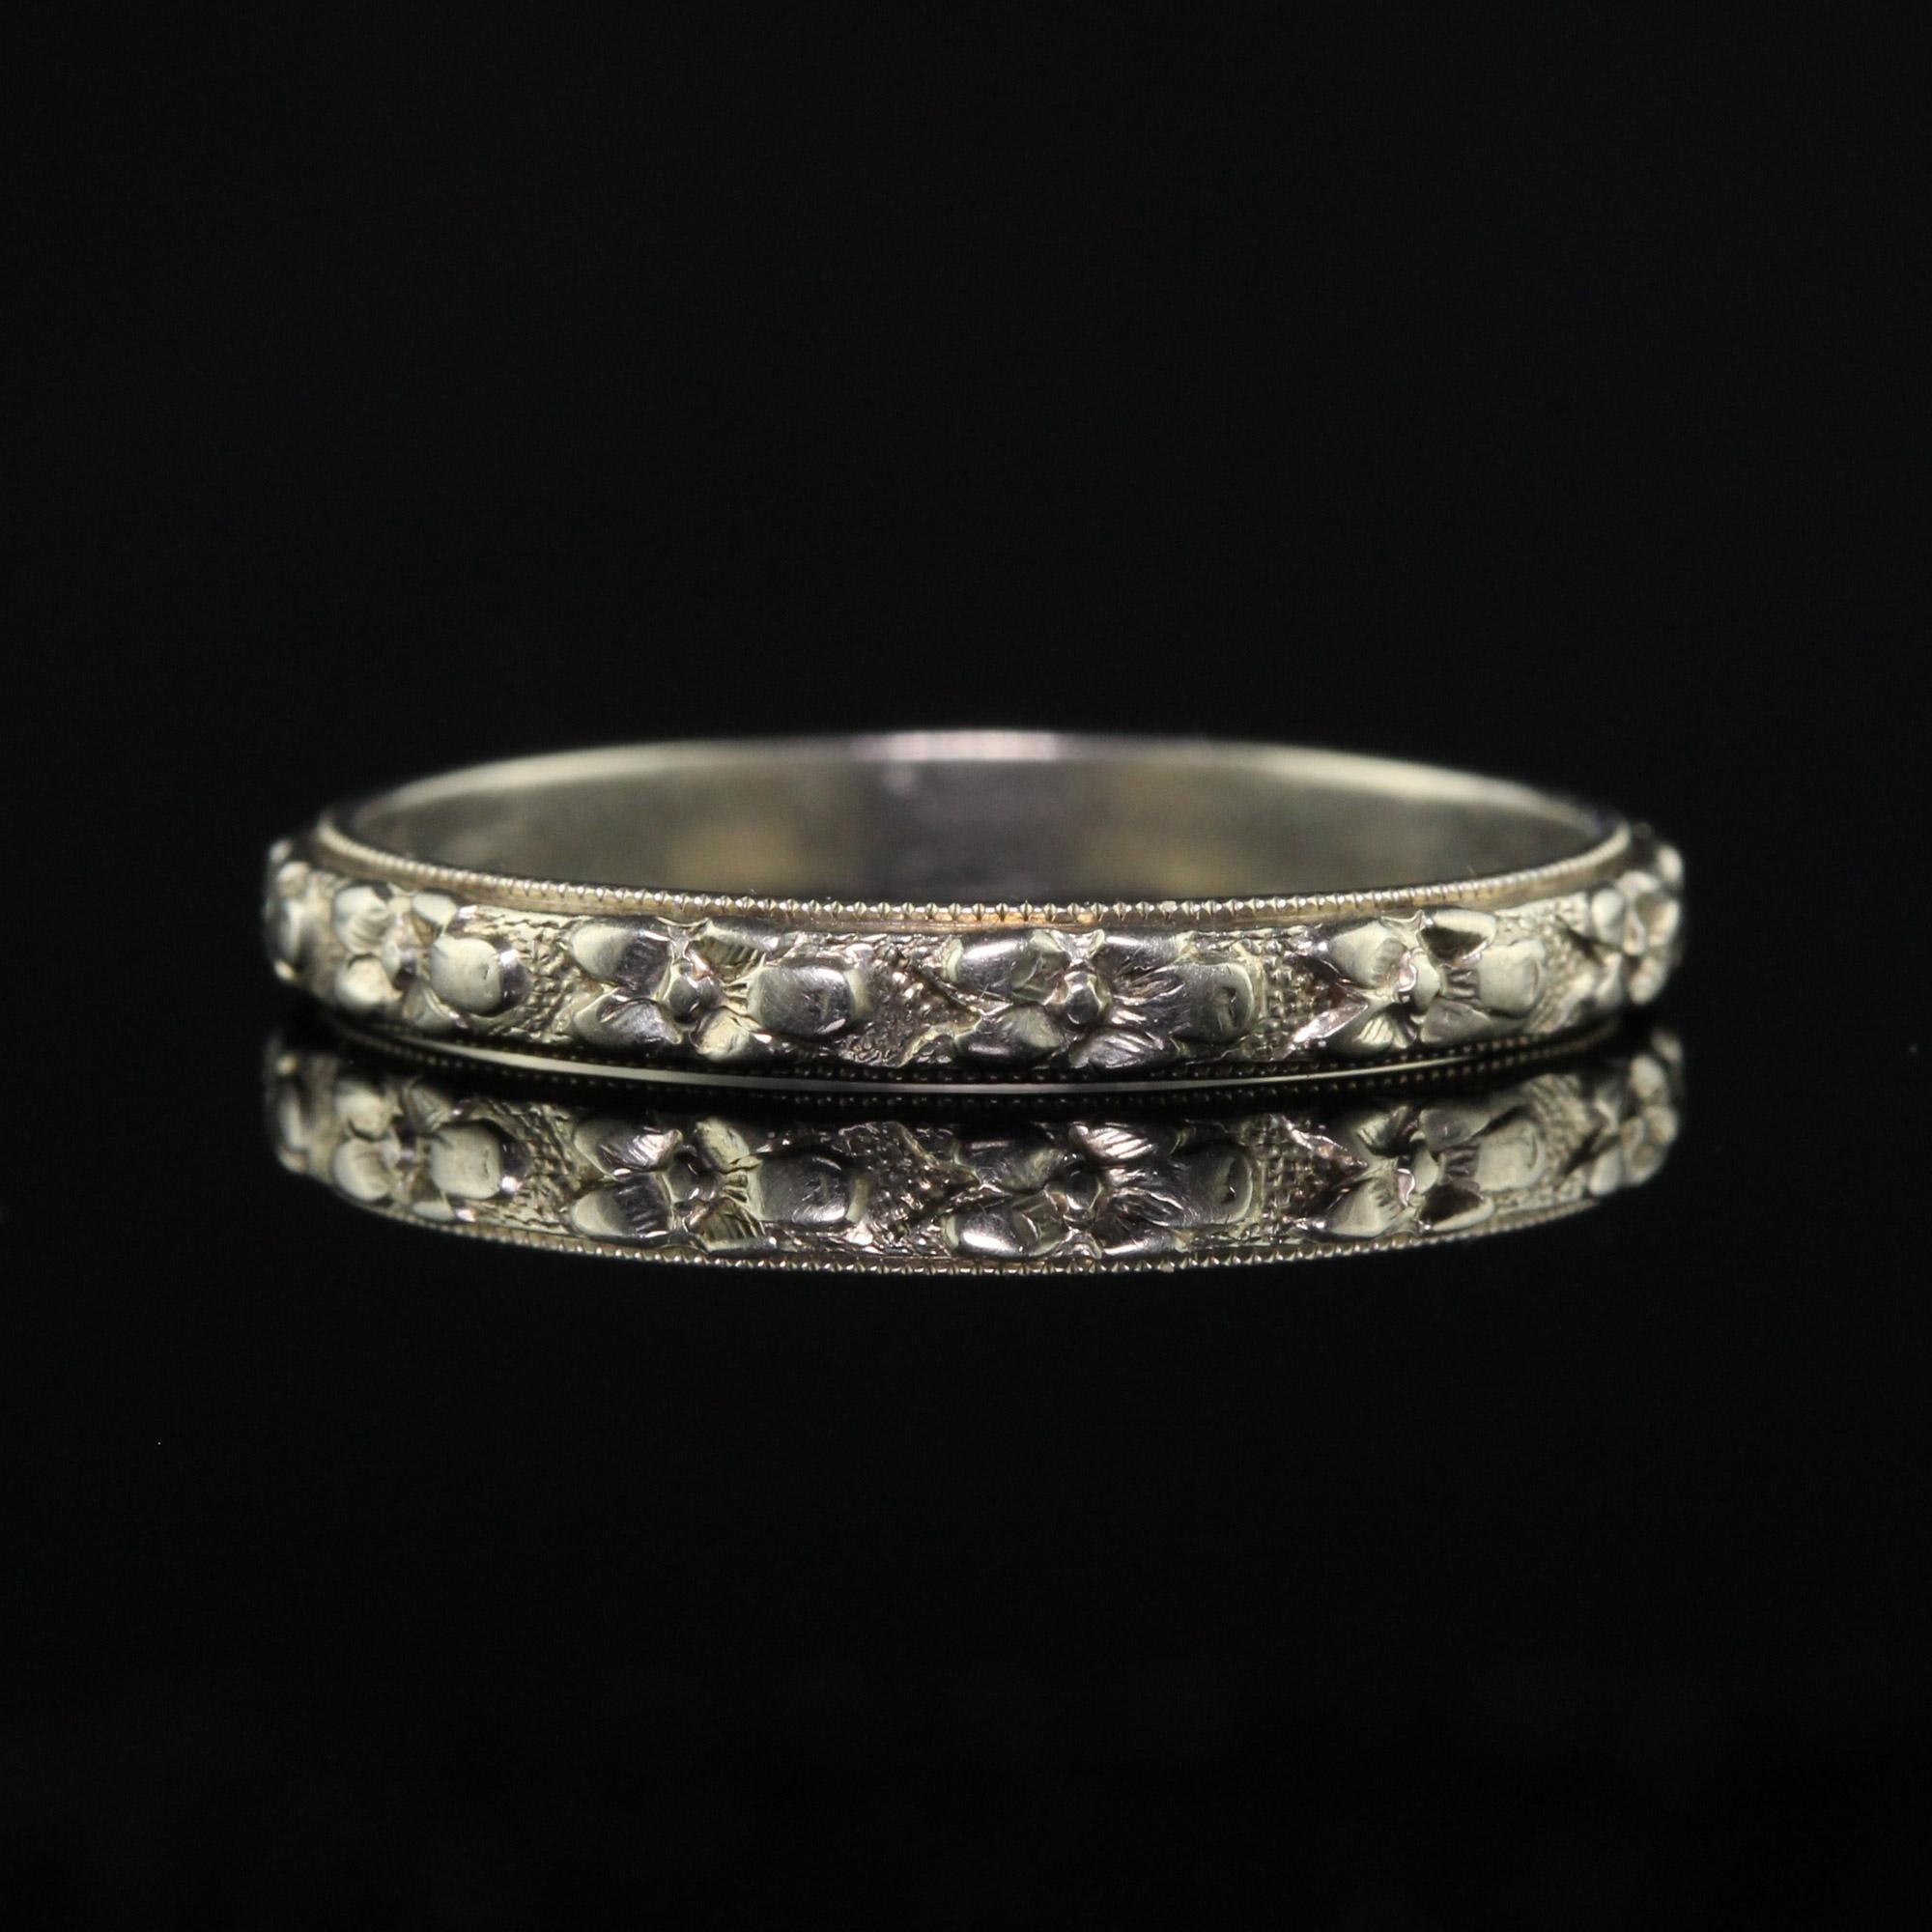 Antique Art Deco 14K White Gold Floral Engraved Wedding Band - Size 6 In Good Condition For Sale In Great Neck, NY